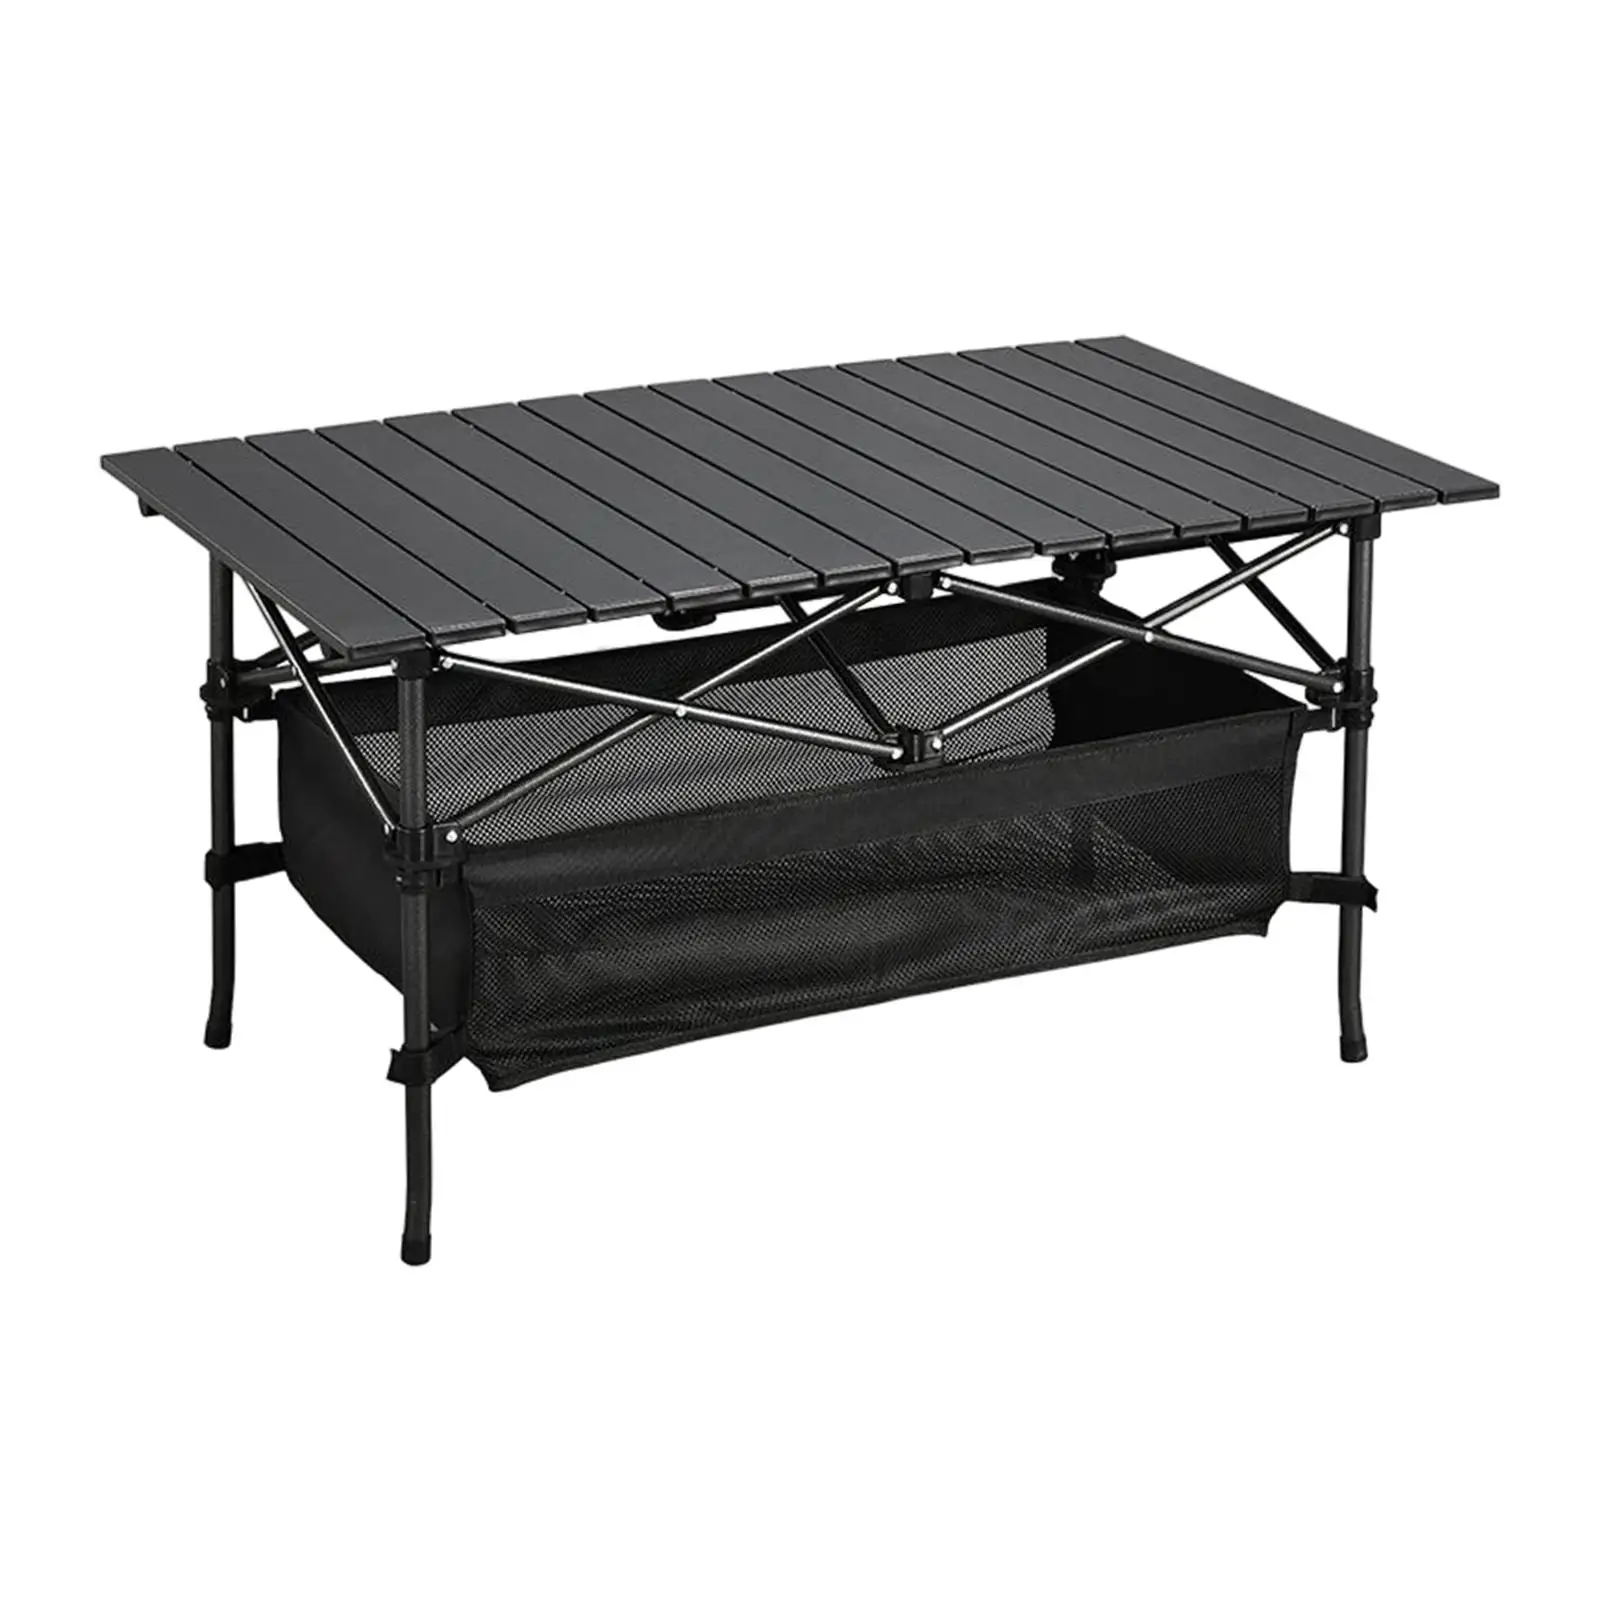 Camping Folding Table Aluminum with Large Storage Portable with Carrying Bag for Outdoor Indoor, Garden, Hiking, Picnic Desk